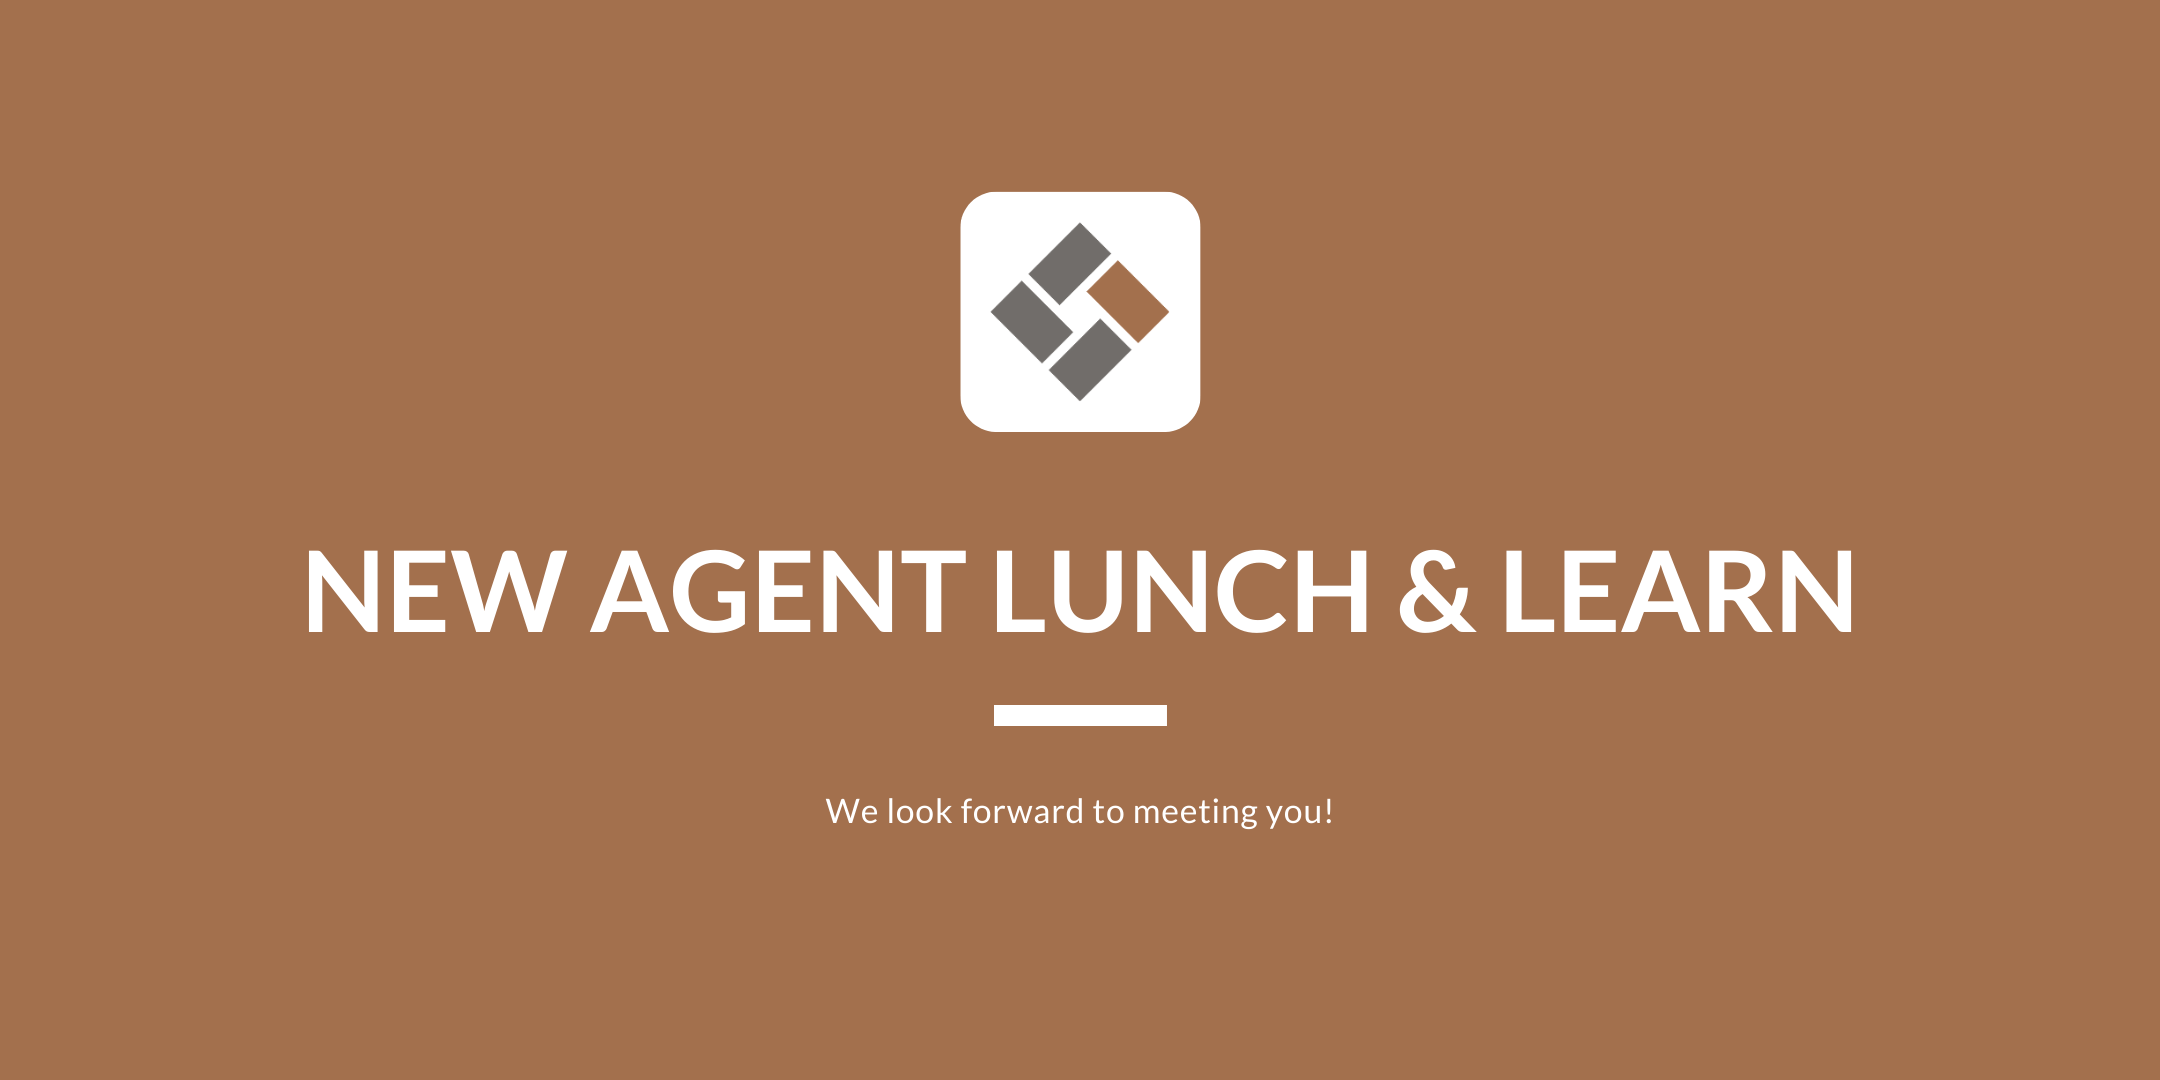 New Agent Lunch & Learn